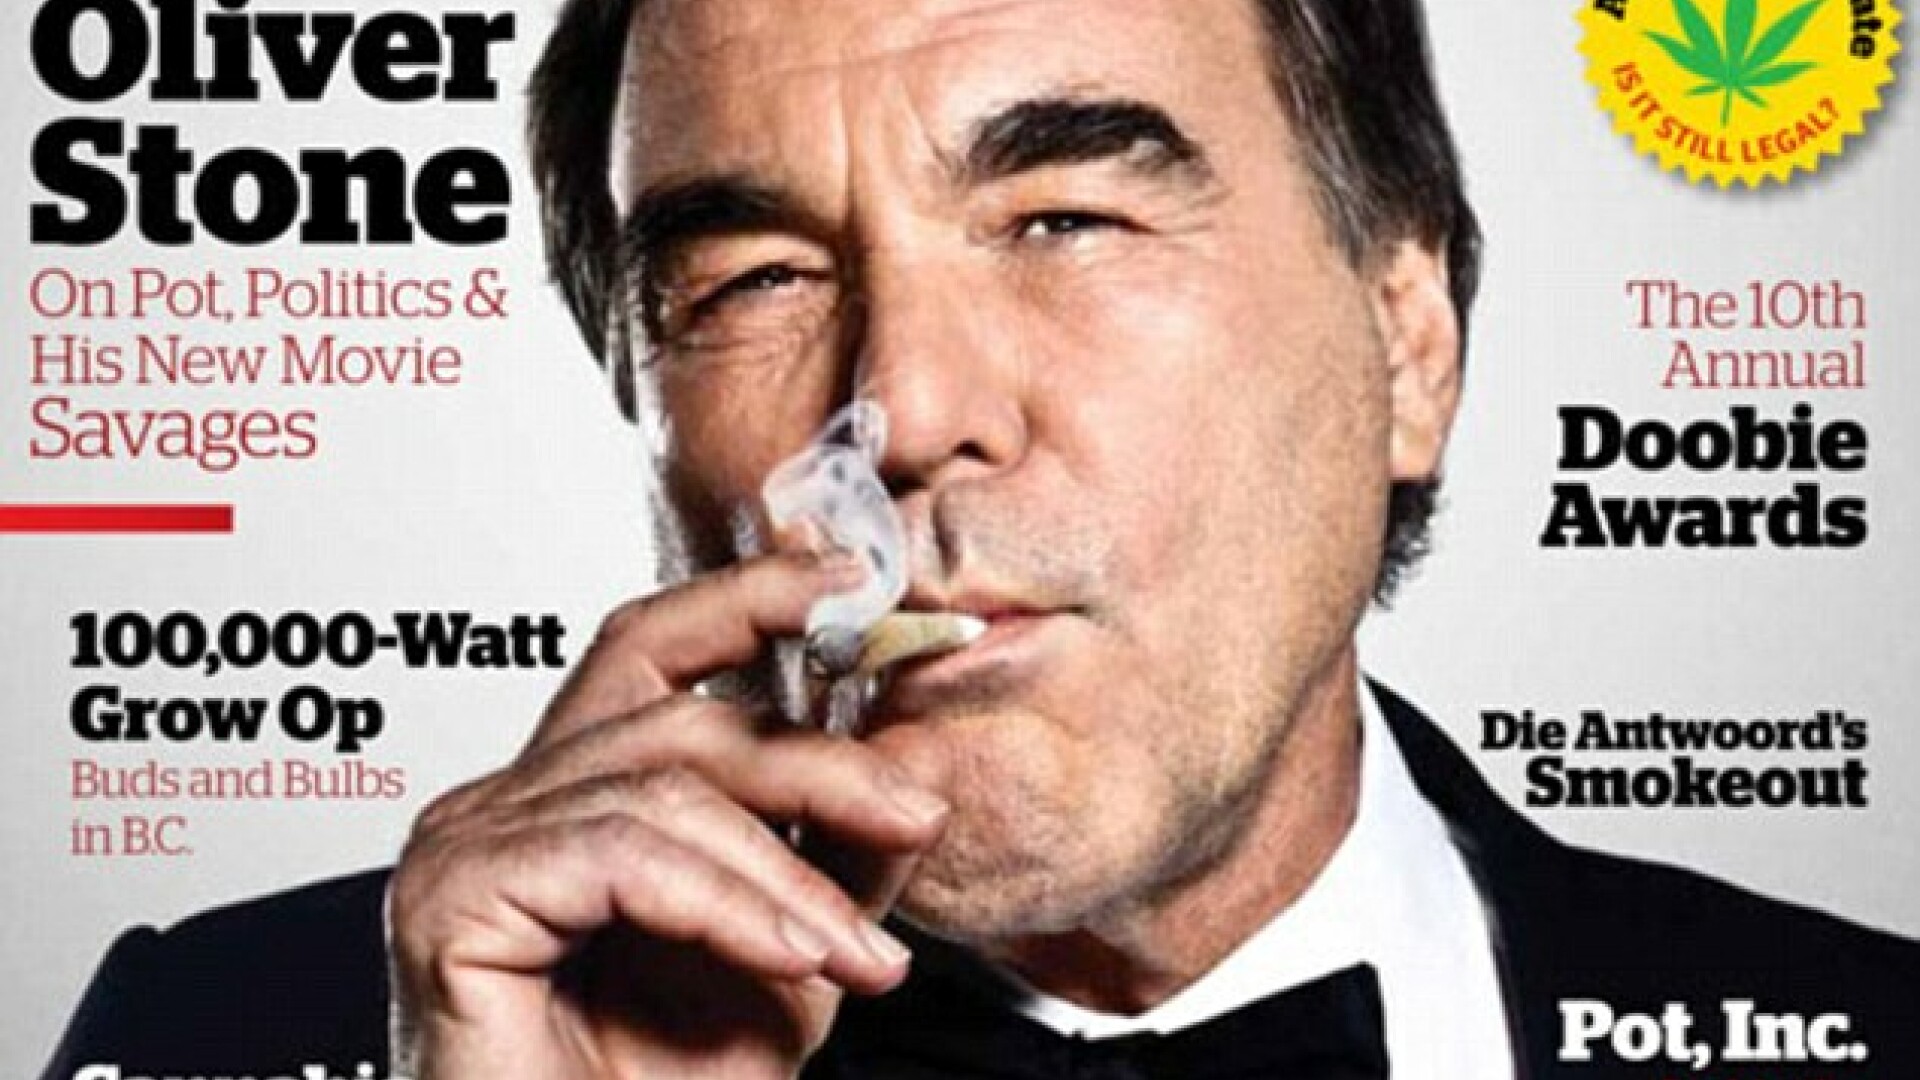 Oliver Stone joint